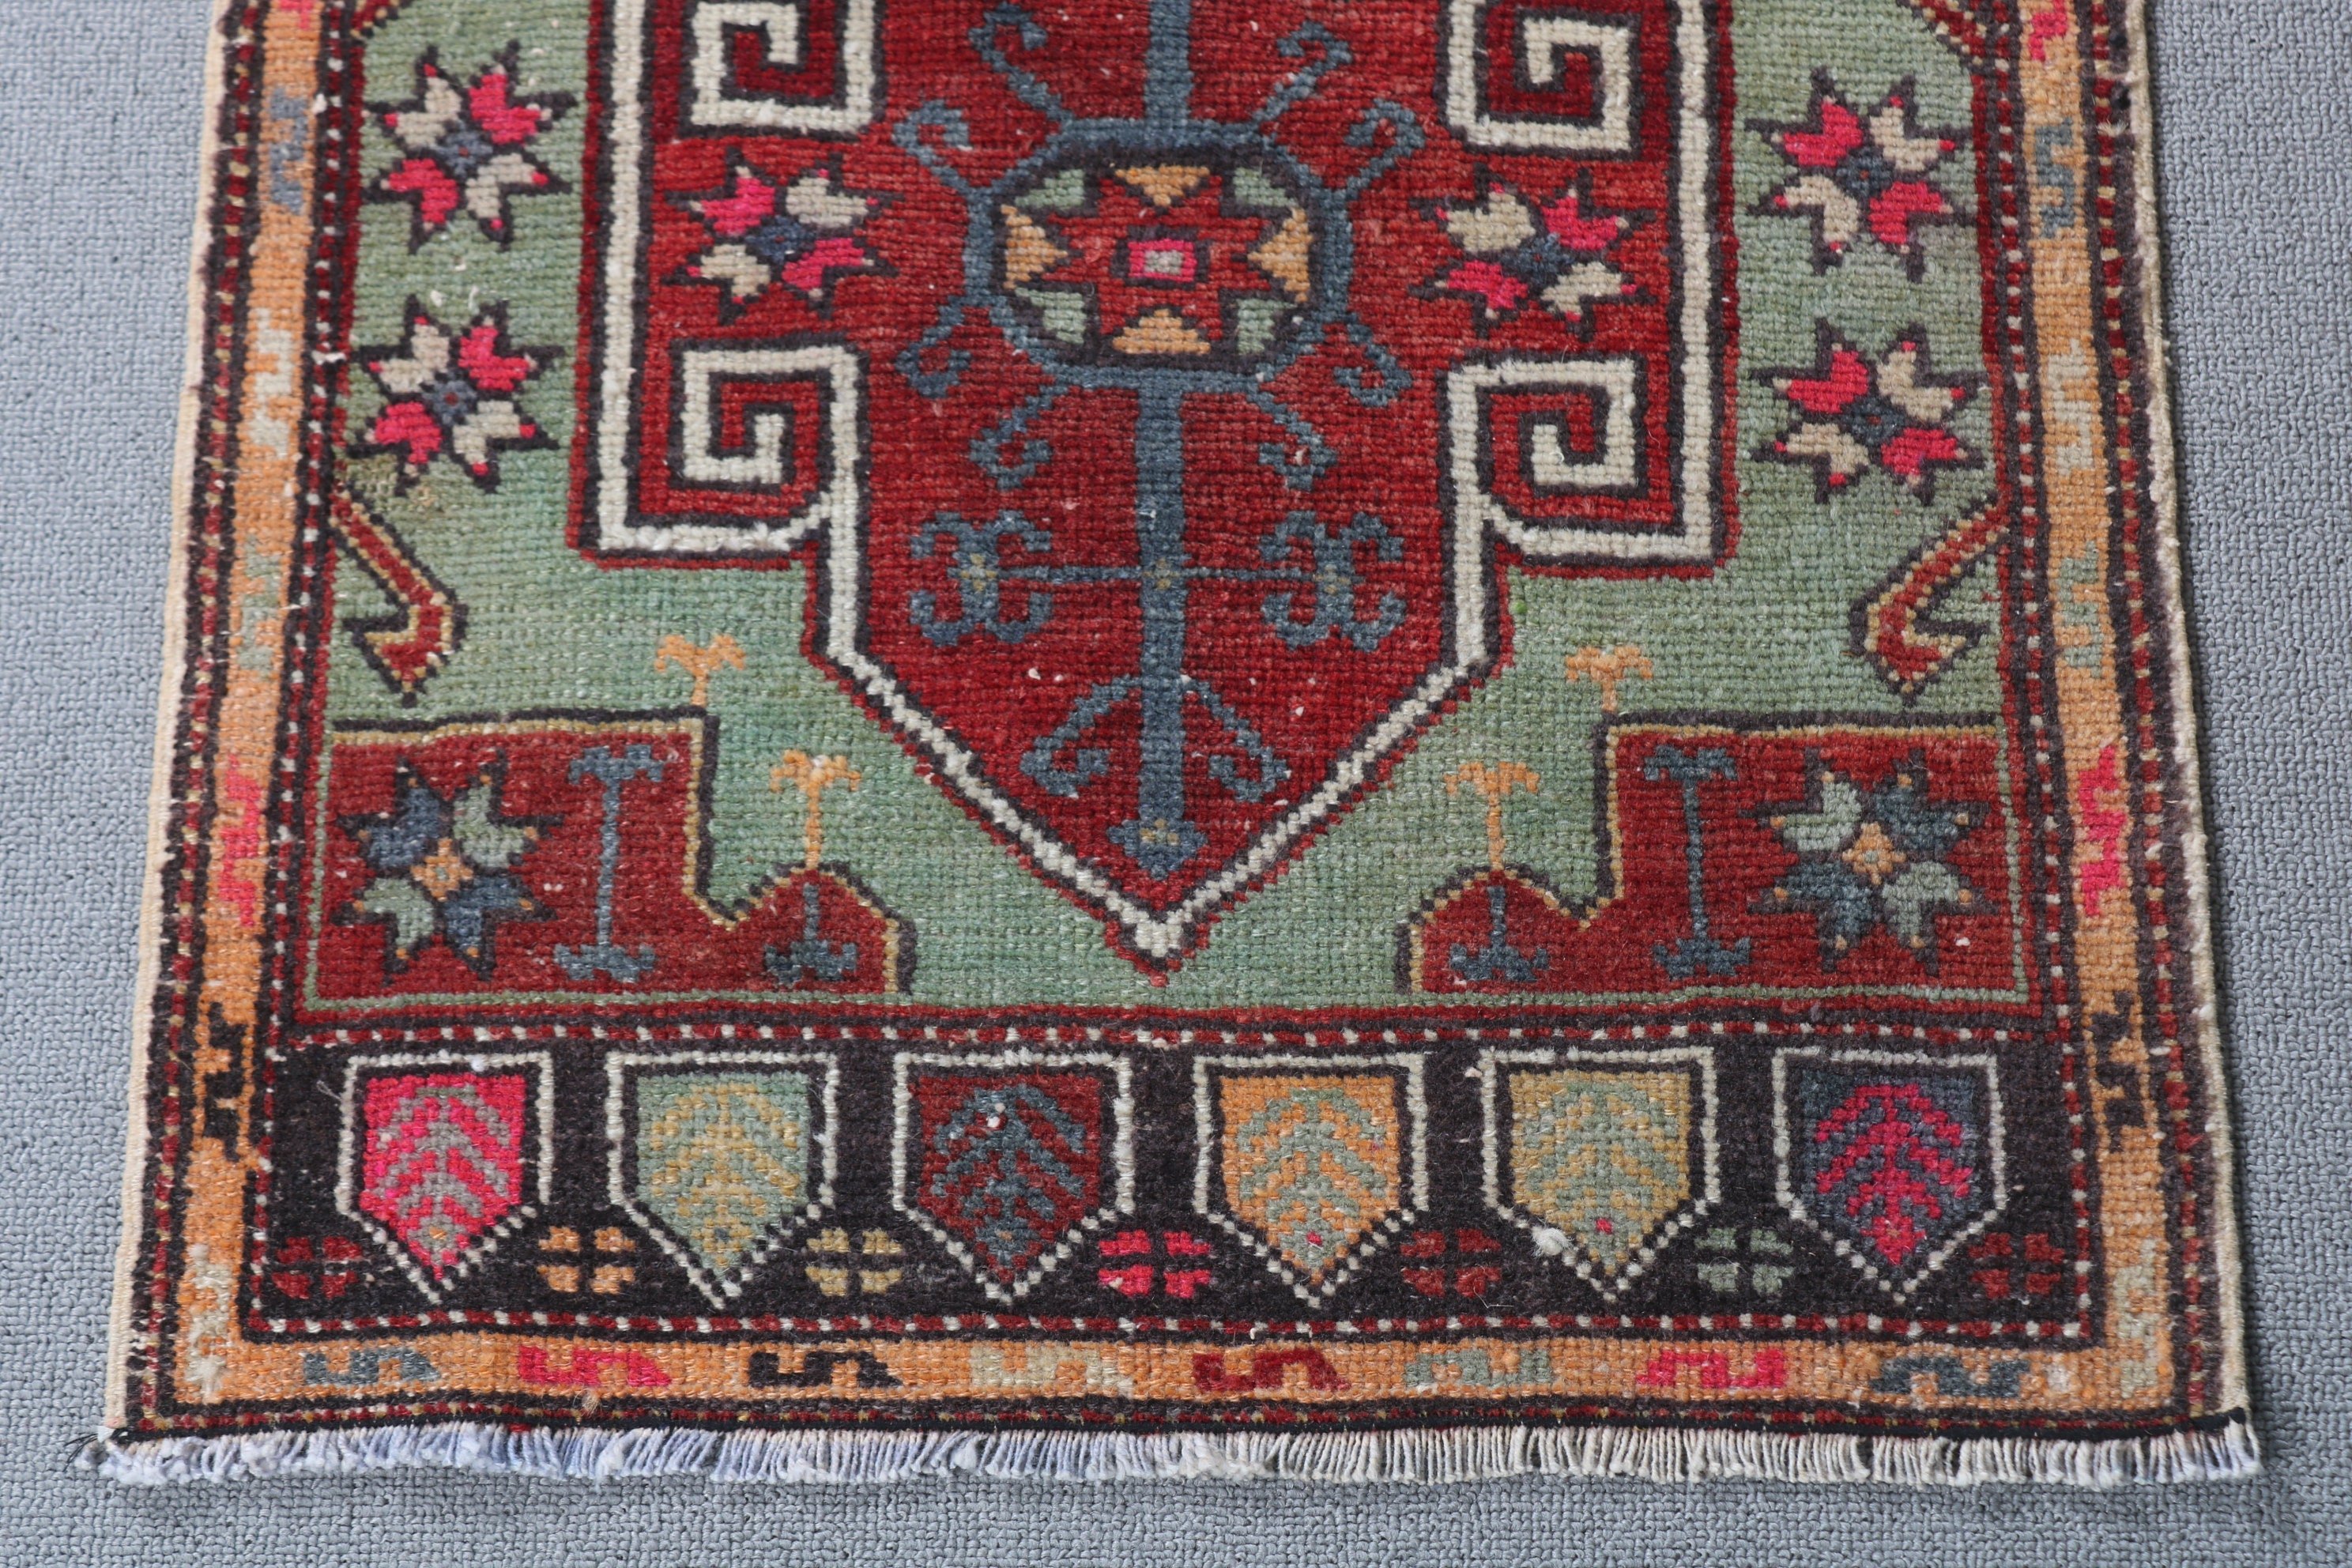 Red Floor Rug, Kitchen Rugs, Rugs for Car Mat, Vintage Rug, 1.7x3.5 ft Small Rug, Pastel Rug, Turkish Rugs, Oushak Rug, Wall Hanging Rugs